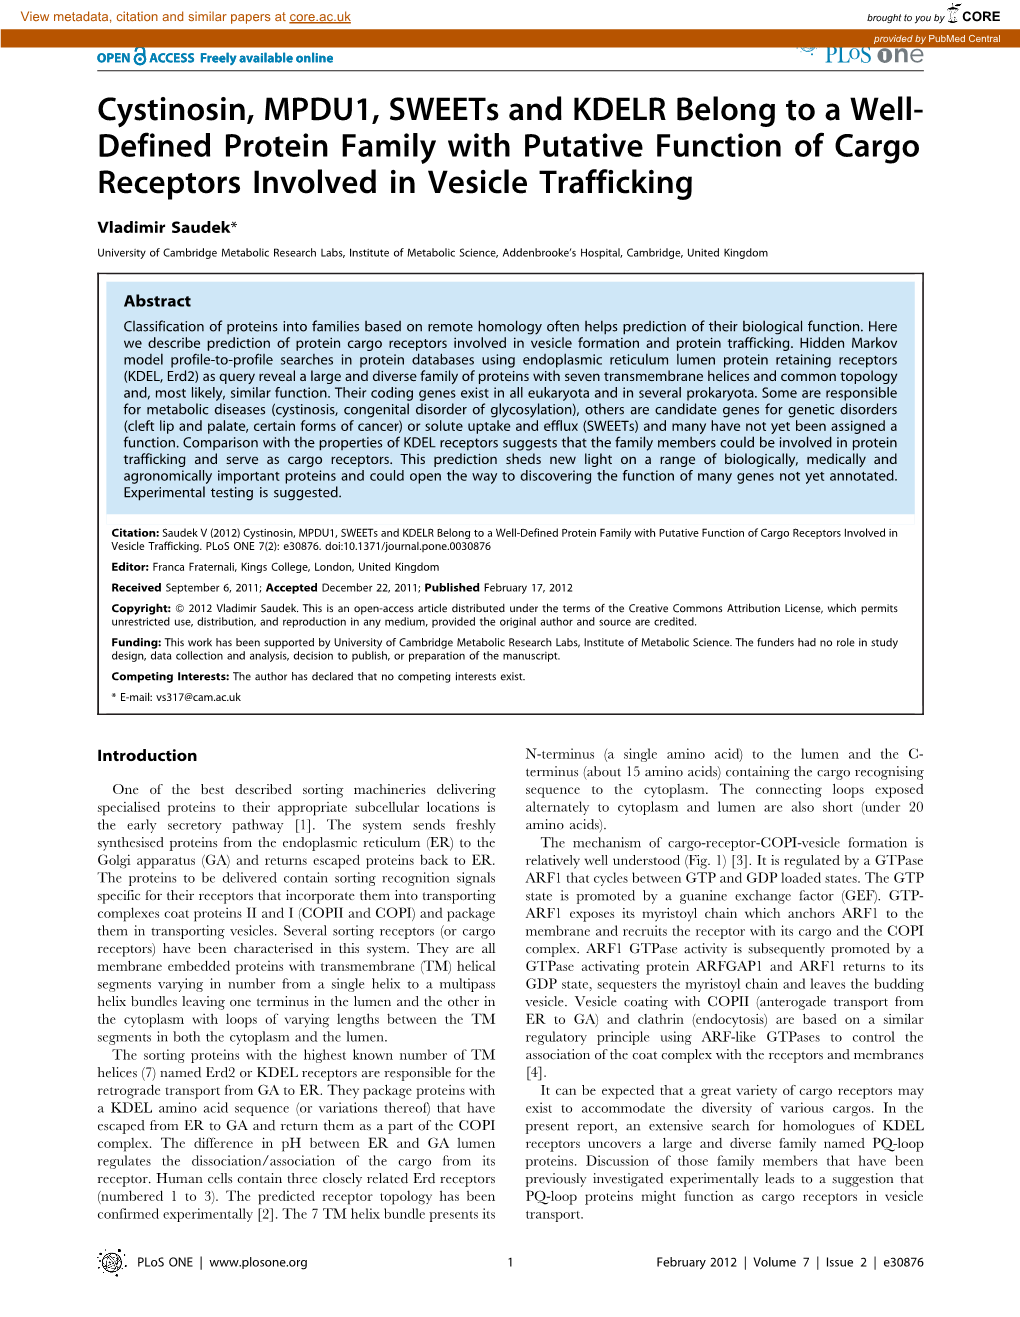 Cystinosin, MPDU1, Sweets and KDELR Belong to a Well- Defined Protein Family with Putative Function of Cargo Receptors Involved in Vesicle Trafficking